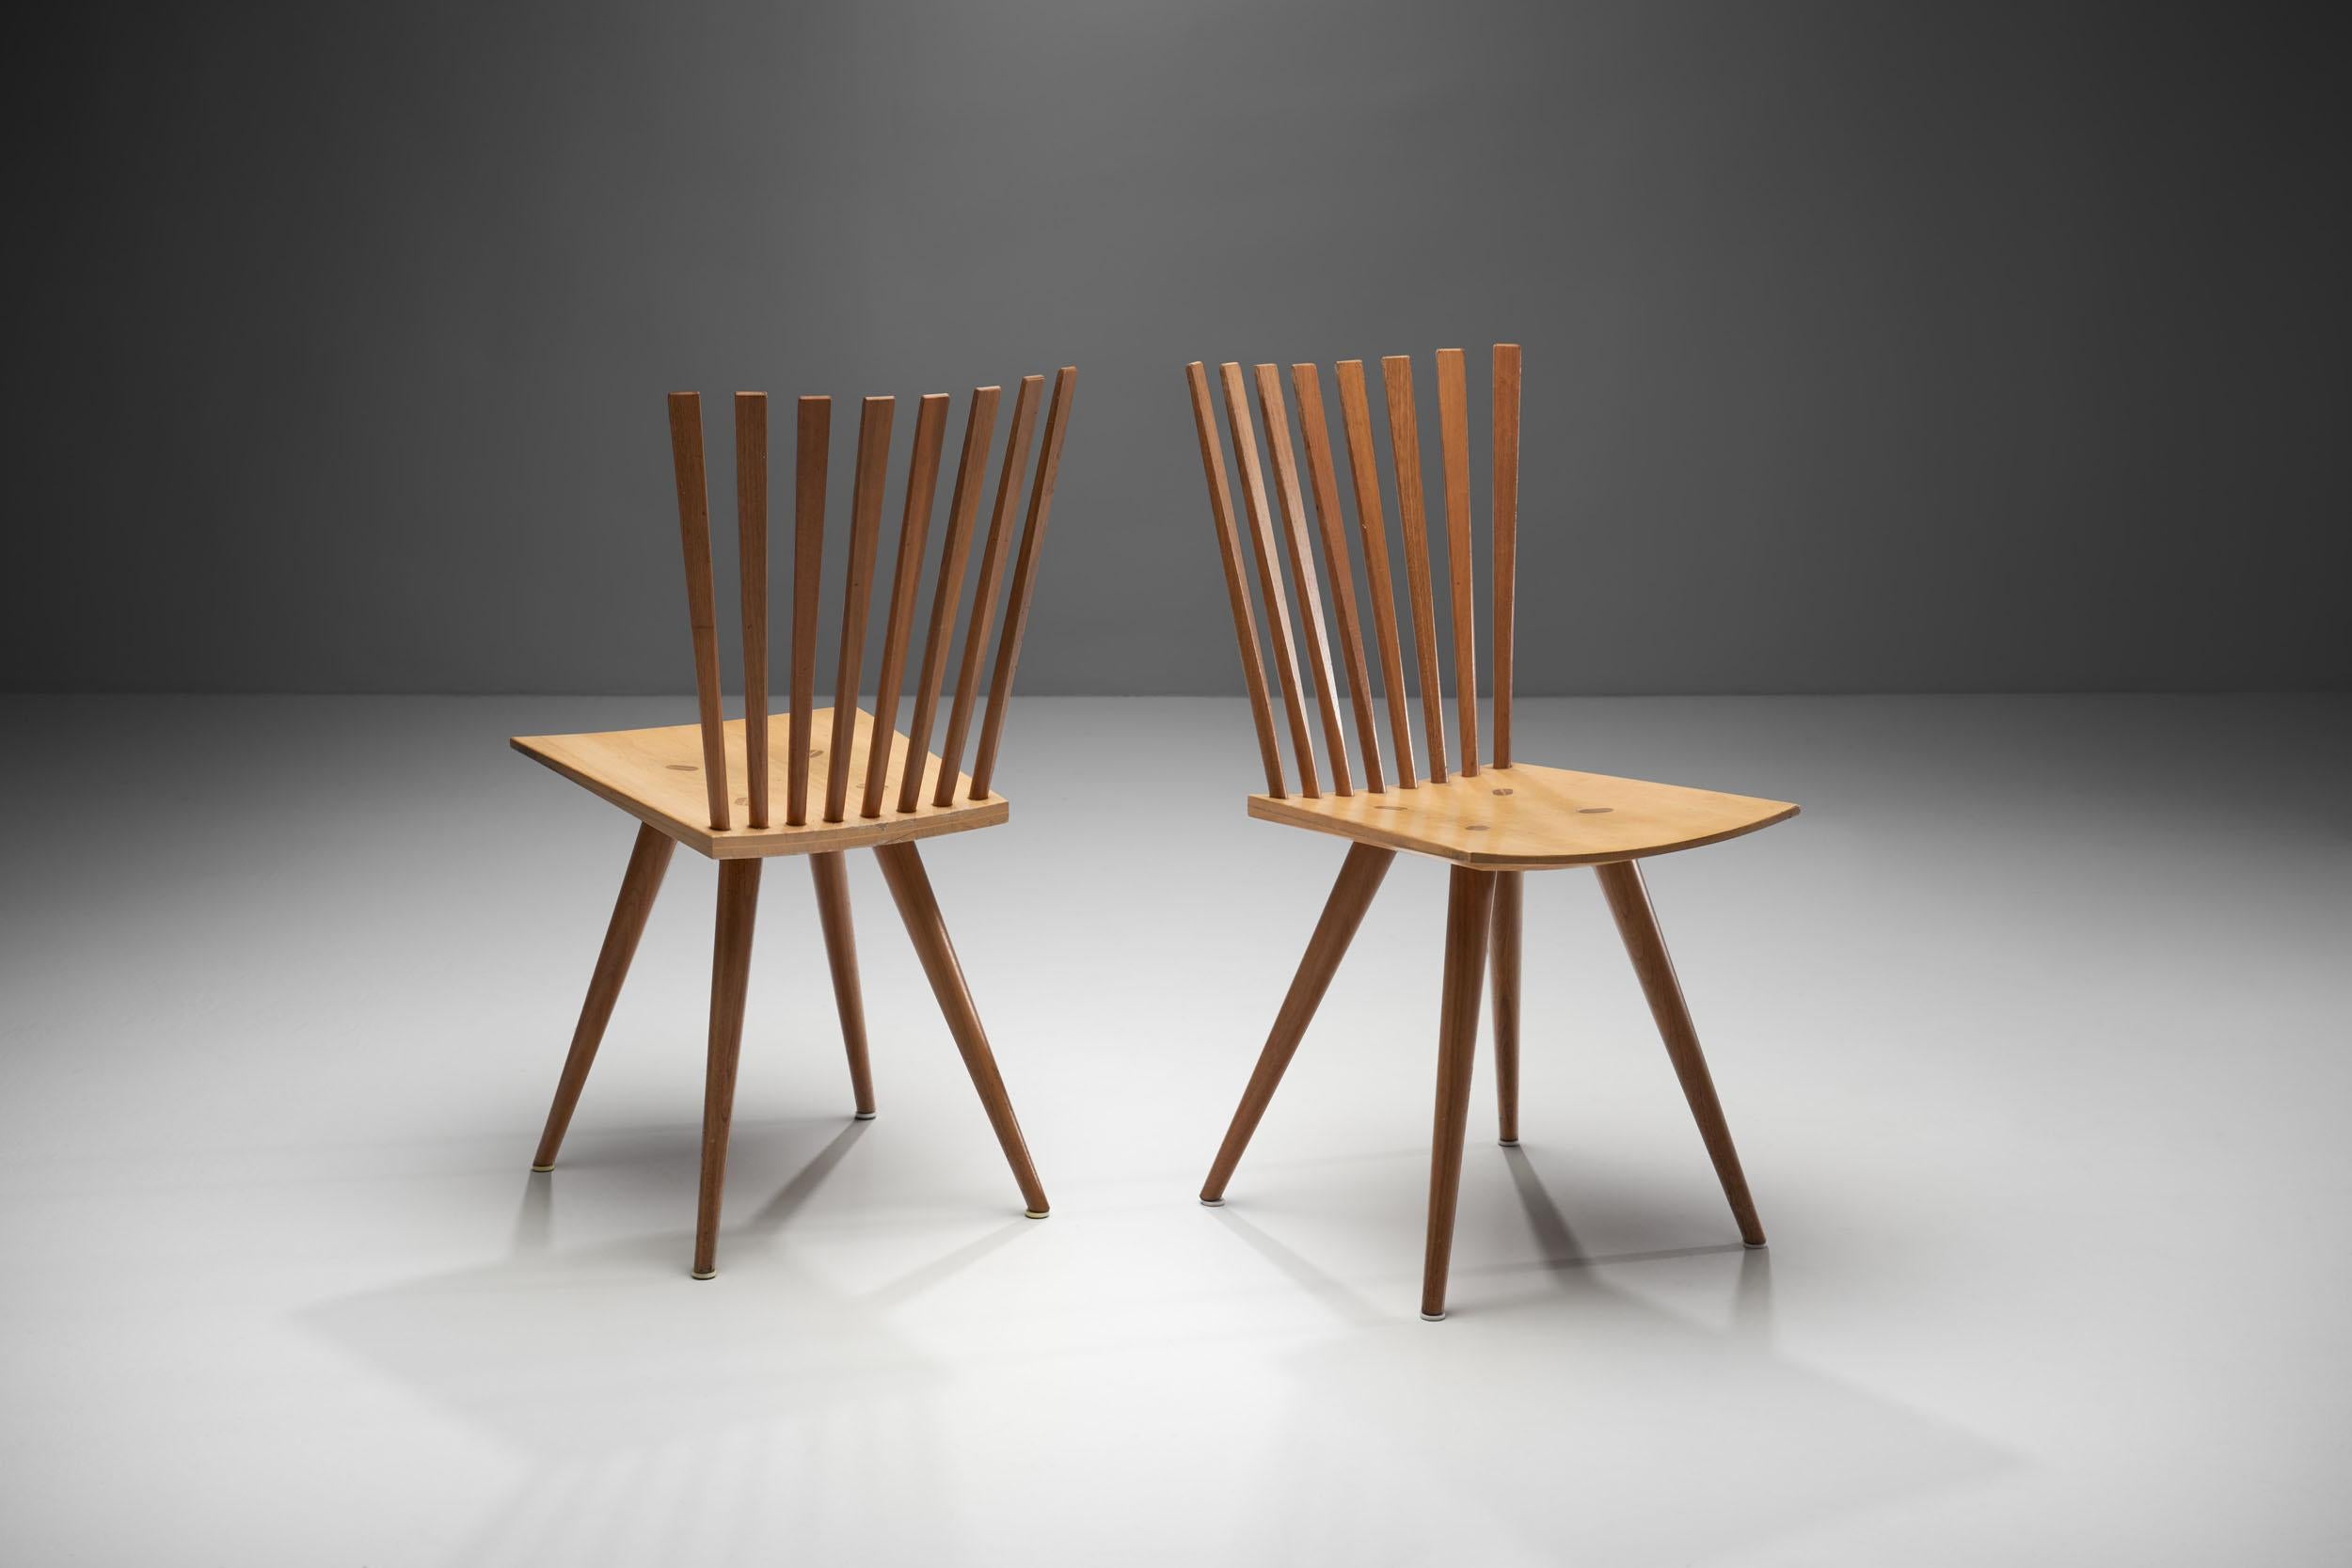 This pair of model J152 chairs by the Danish designer duo, Johannes Foersom and Peter Hiort-Lorenzen, is better known as the “Mikado” chair.

The Mikado is a modern interpretation of the 18th century English Windsor chair, whereby the chairs are